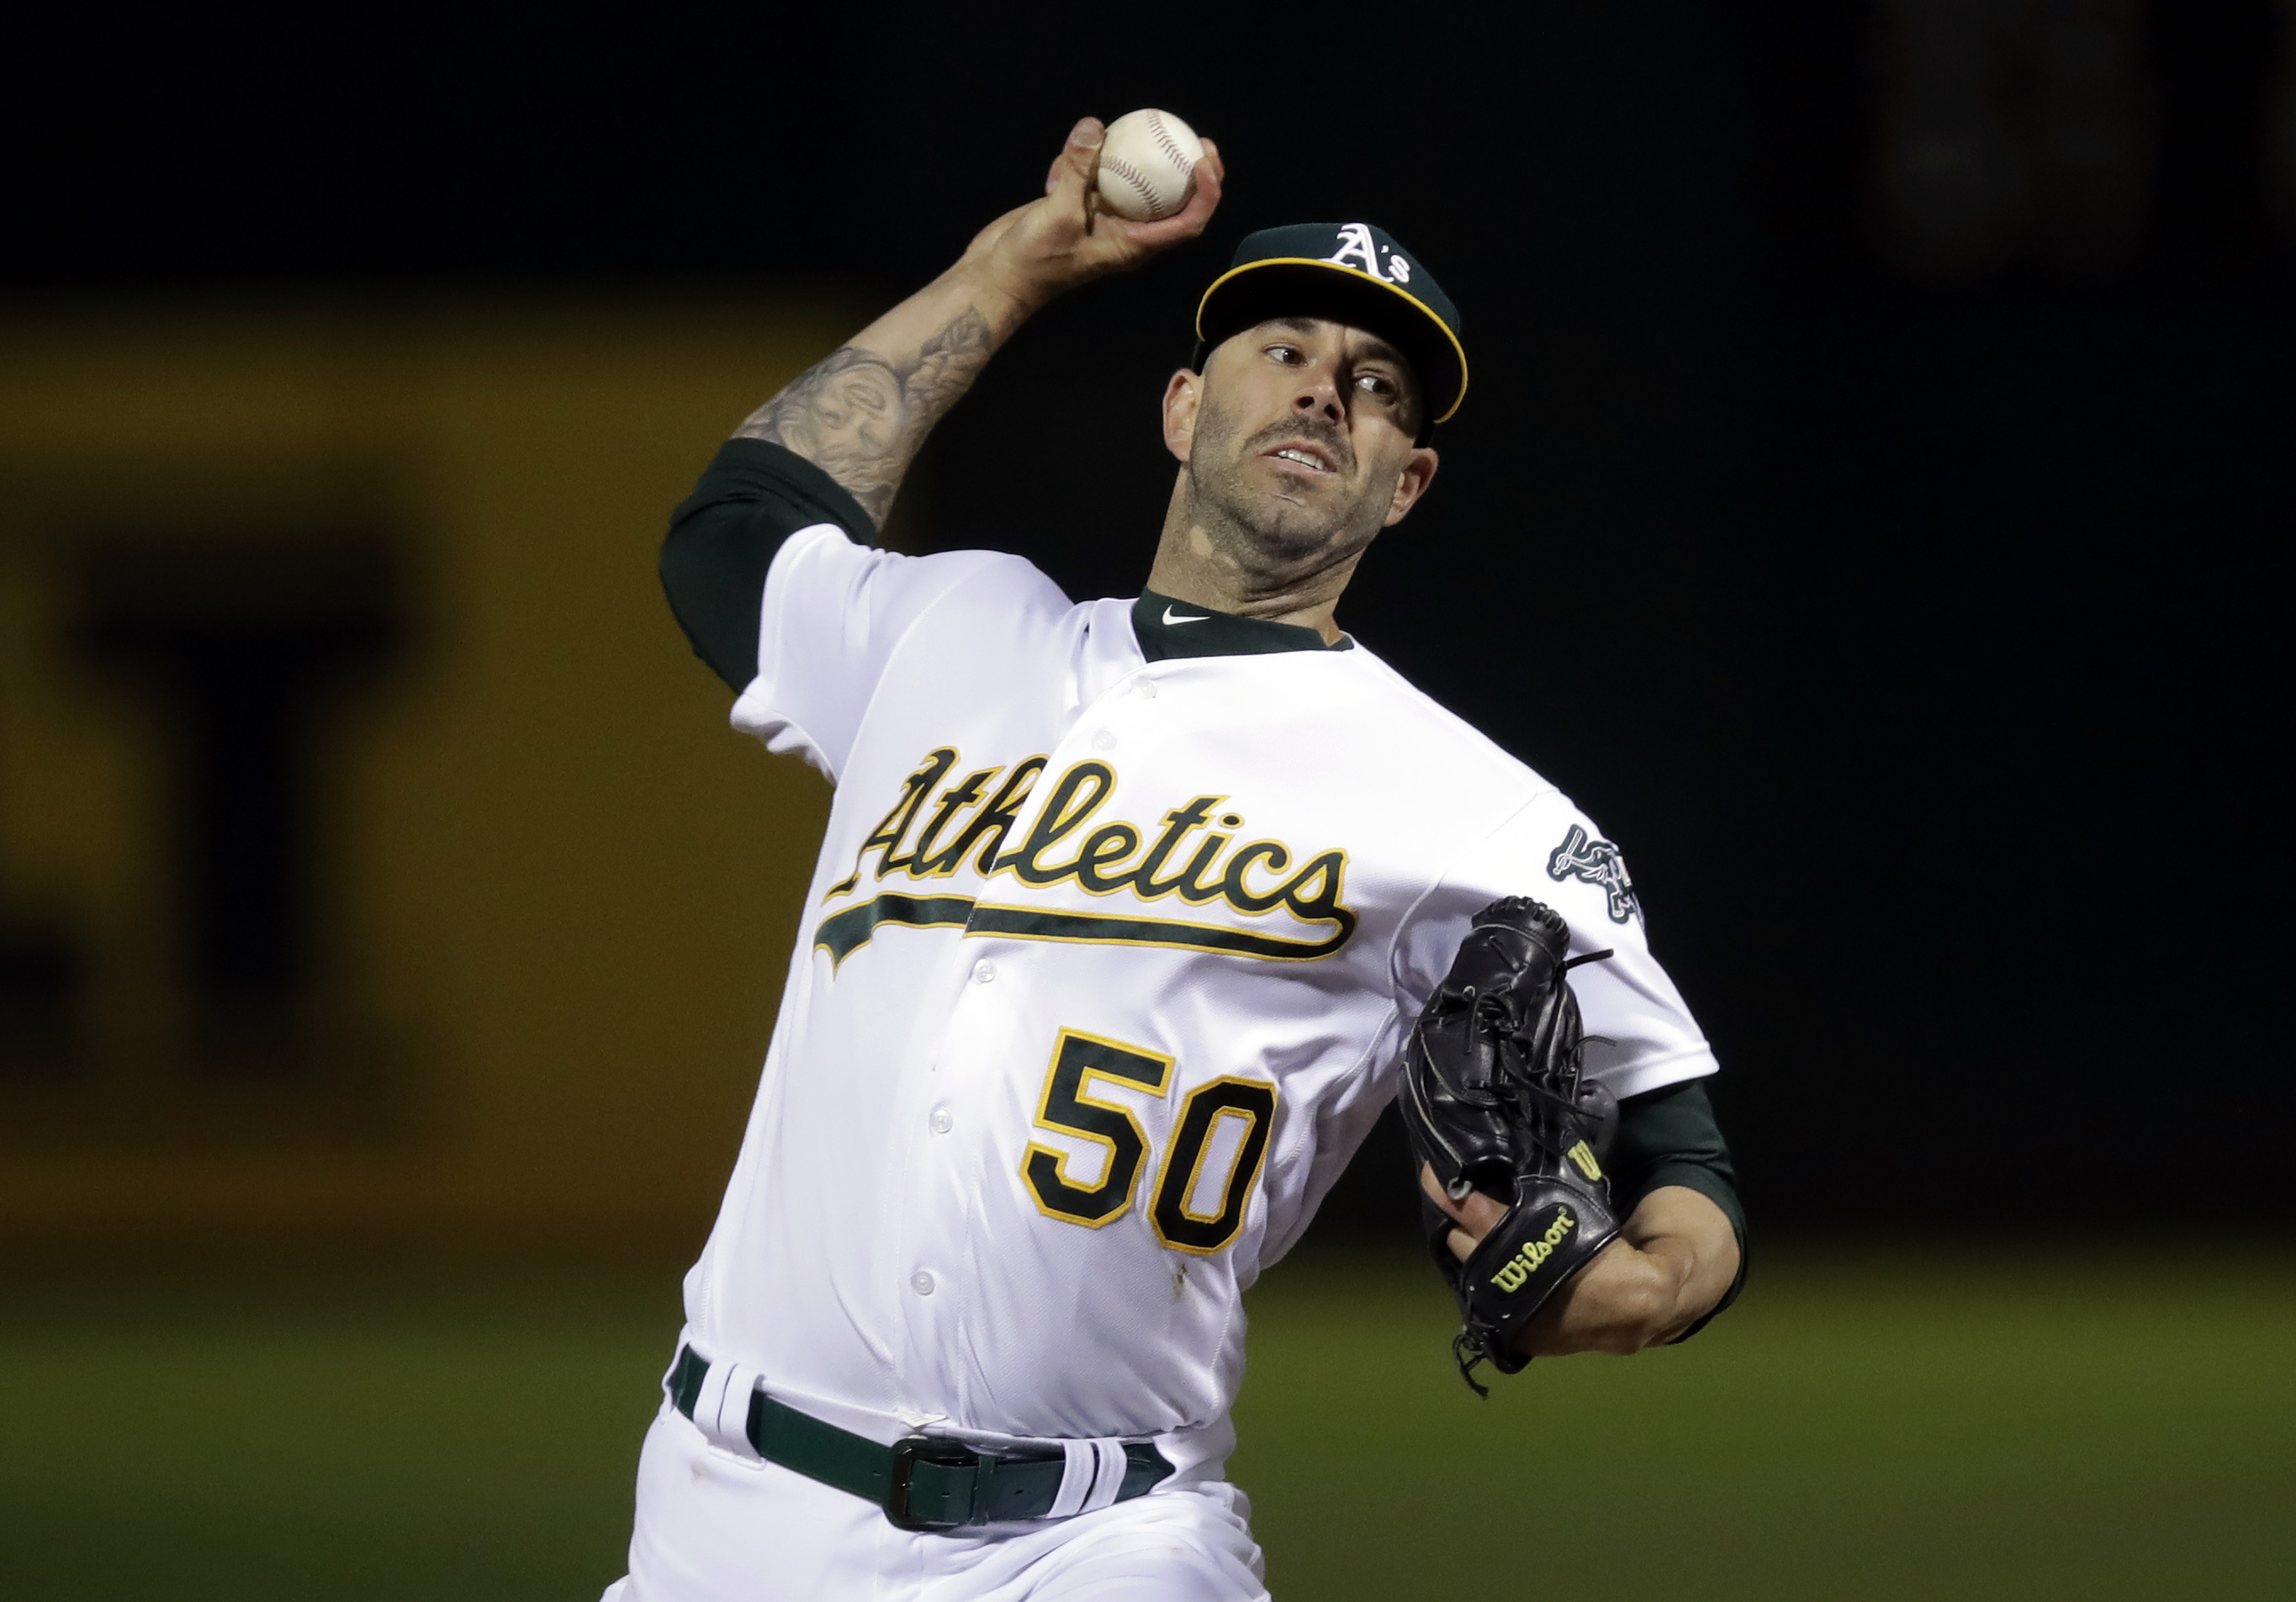 Athletics’ Fiers throws 2nd career no-hitter, beats Reds 2-0